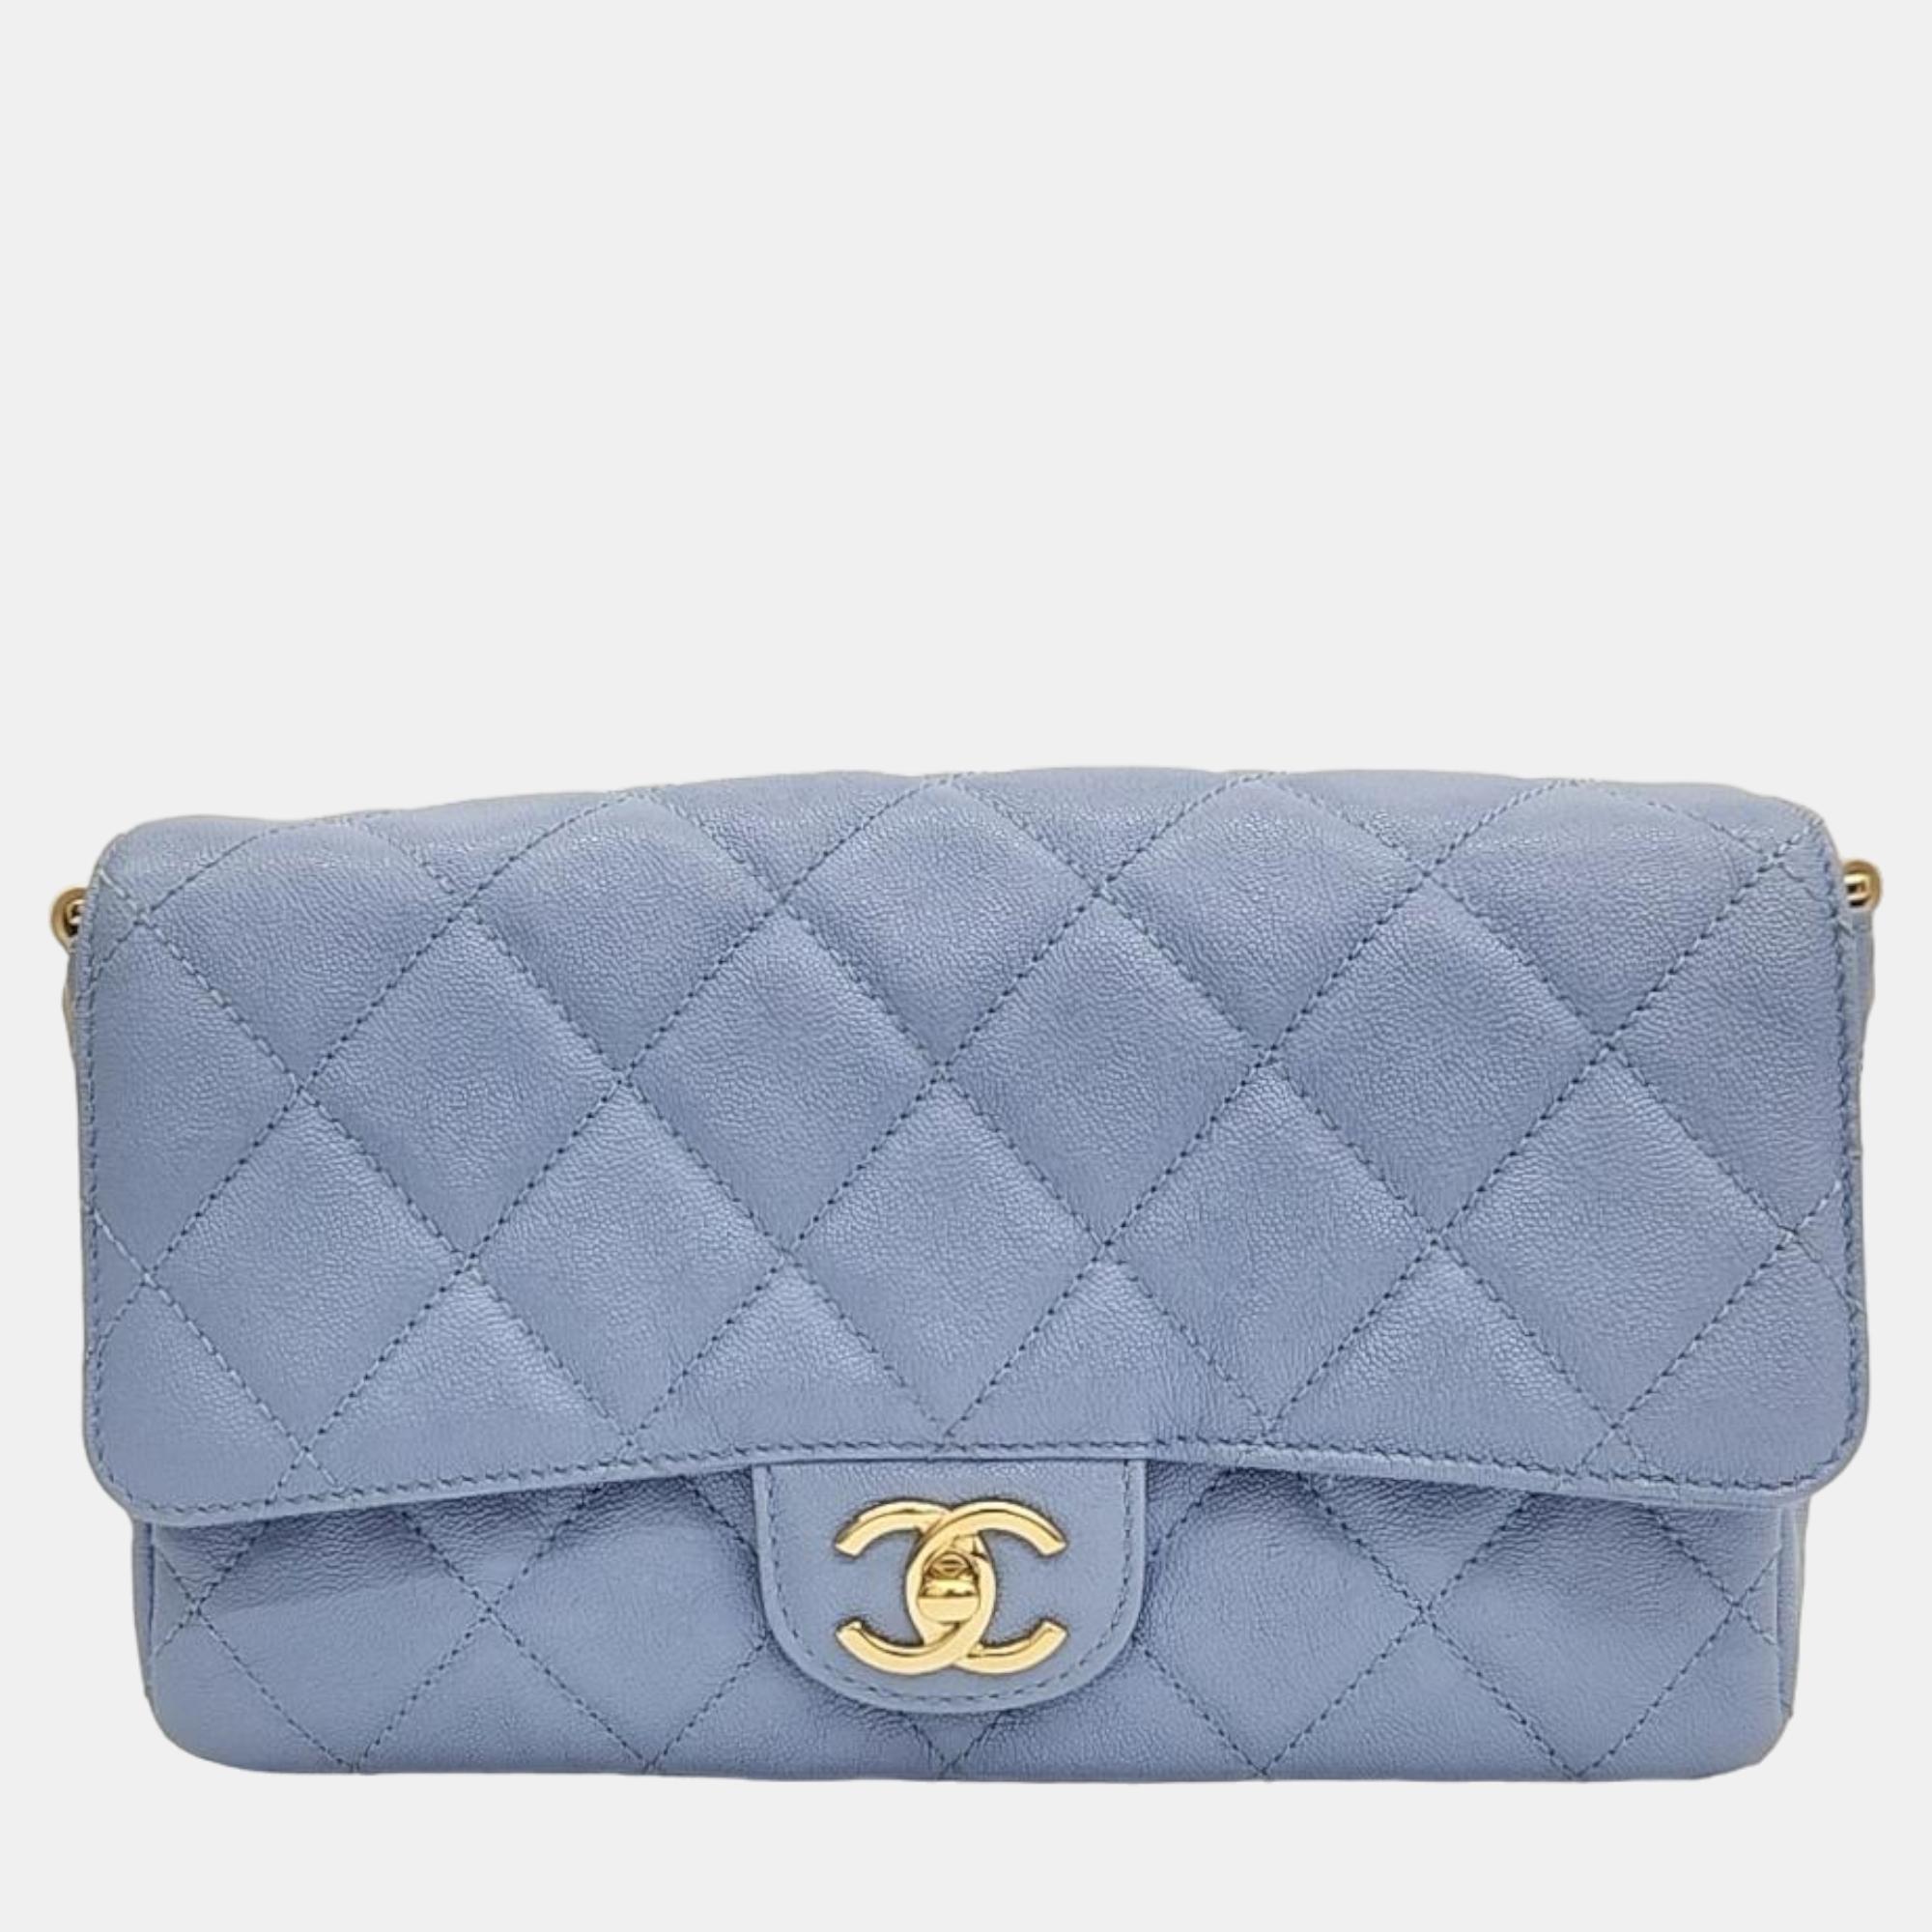 Pre-owned Chanel Blue Caviar Leather Flap Bag